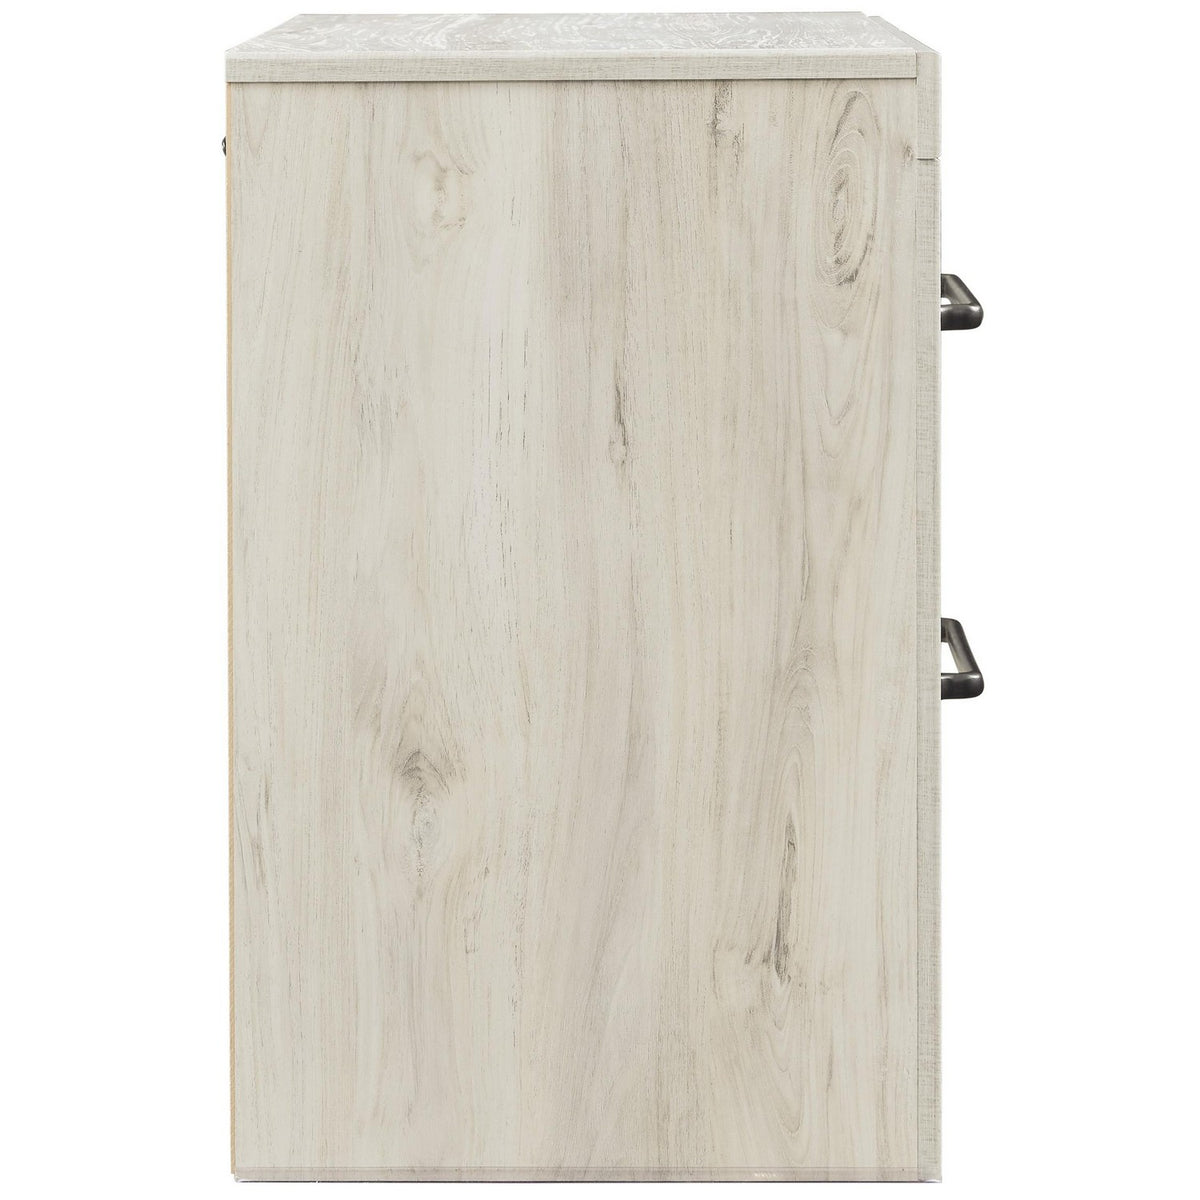 Transitional Wooden Two Drawer Setup Nightstand with Bar Handles in White - BM213351